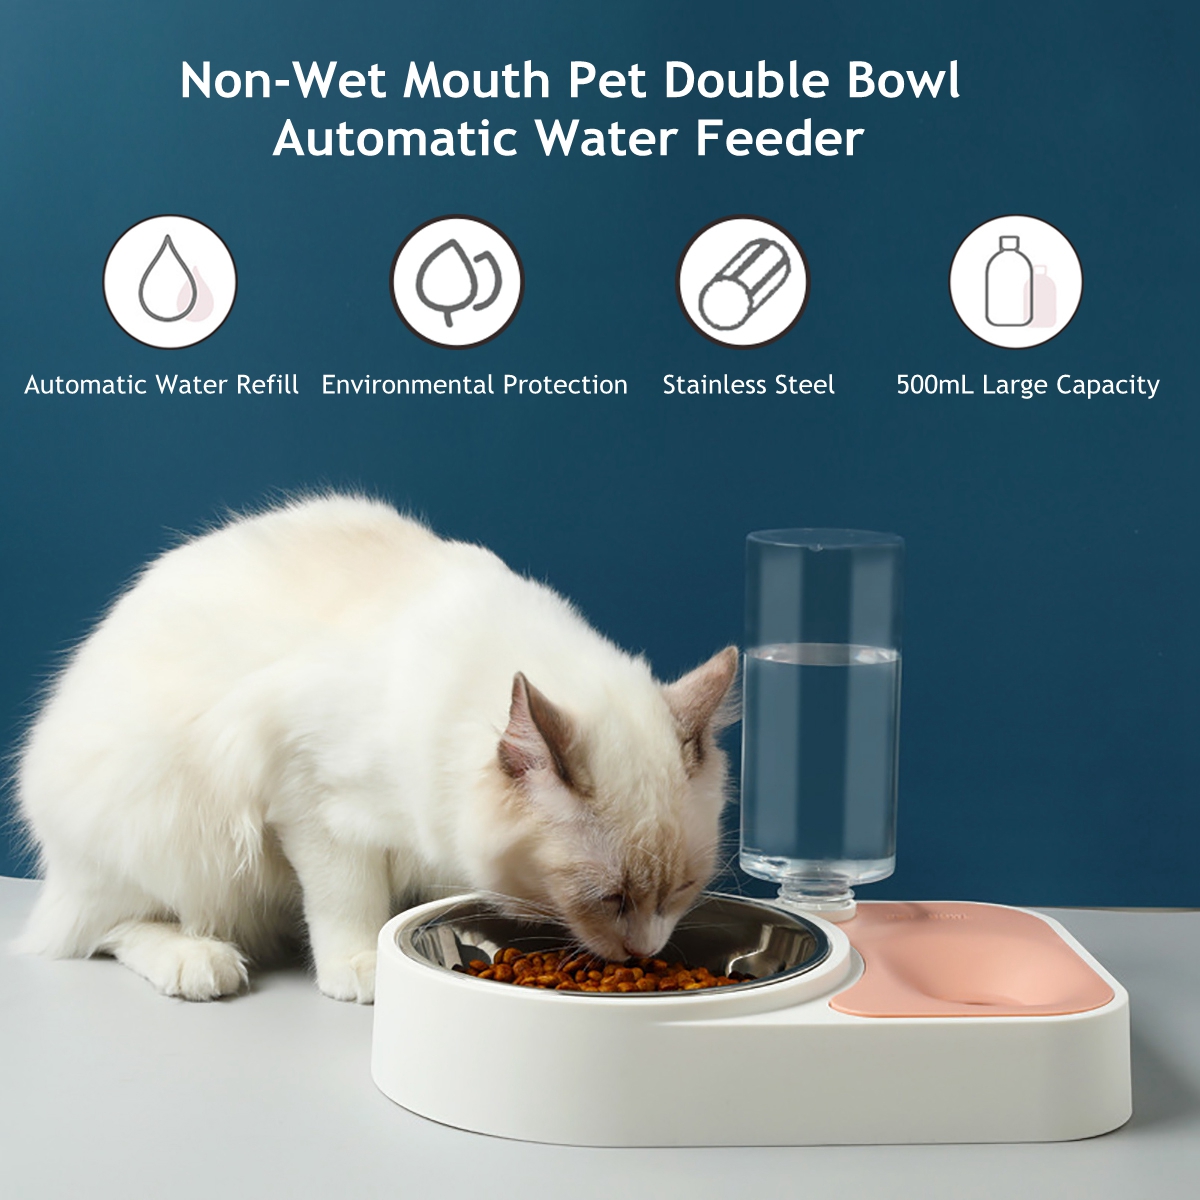 Automatic-Water-Food-Feeder-Cat-Food-Bowl-500ML-Water-Refill-Bottle-Pet-Dog-Anti-Vomiting-Cat-Dish-1881213-2